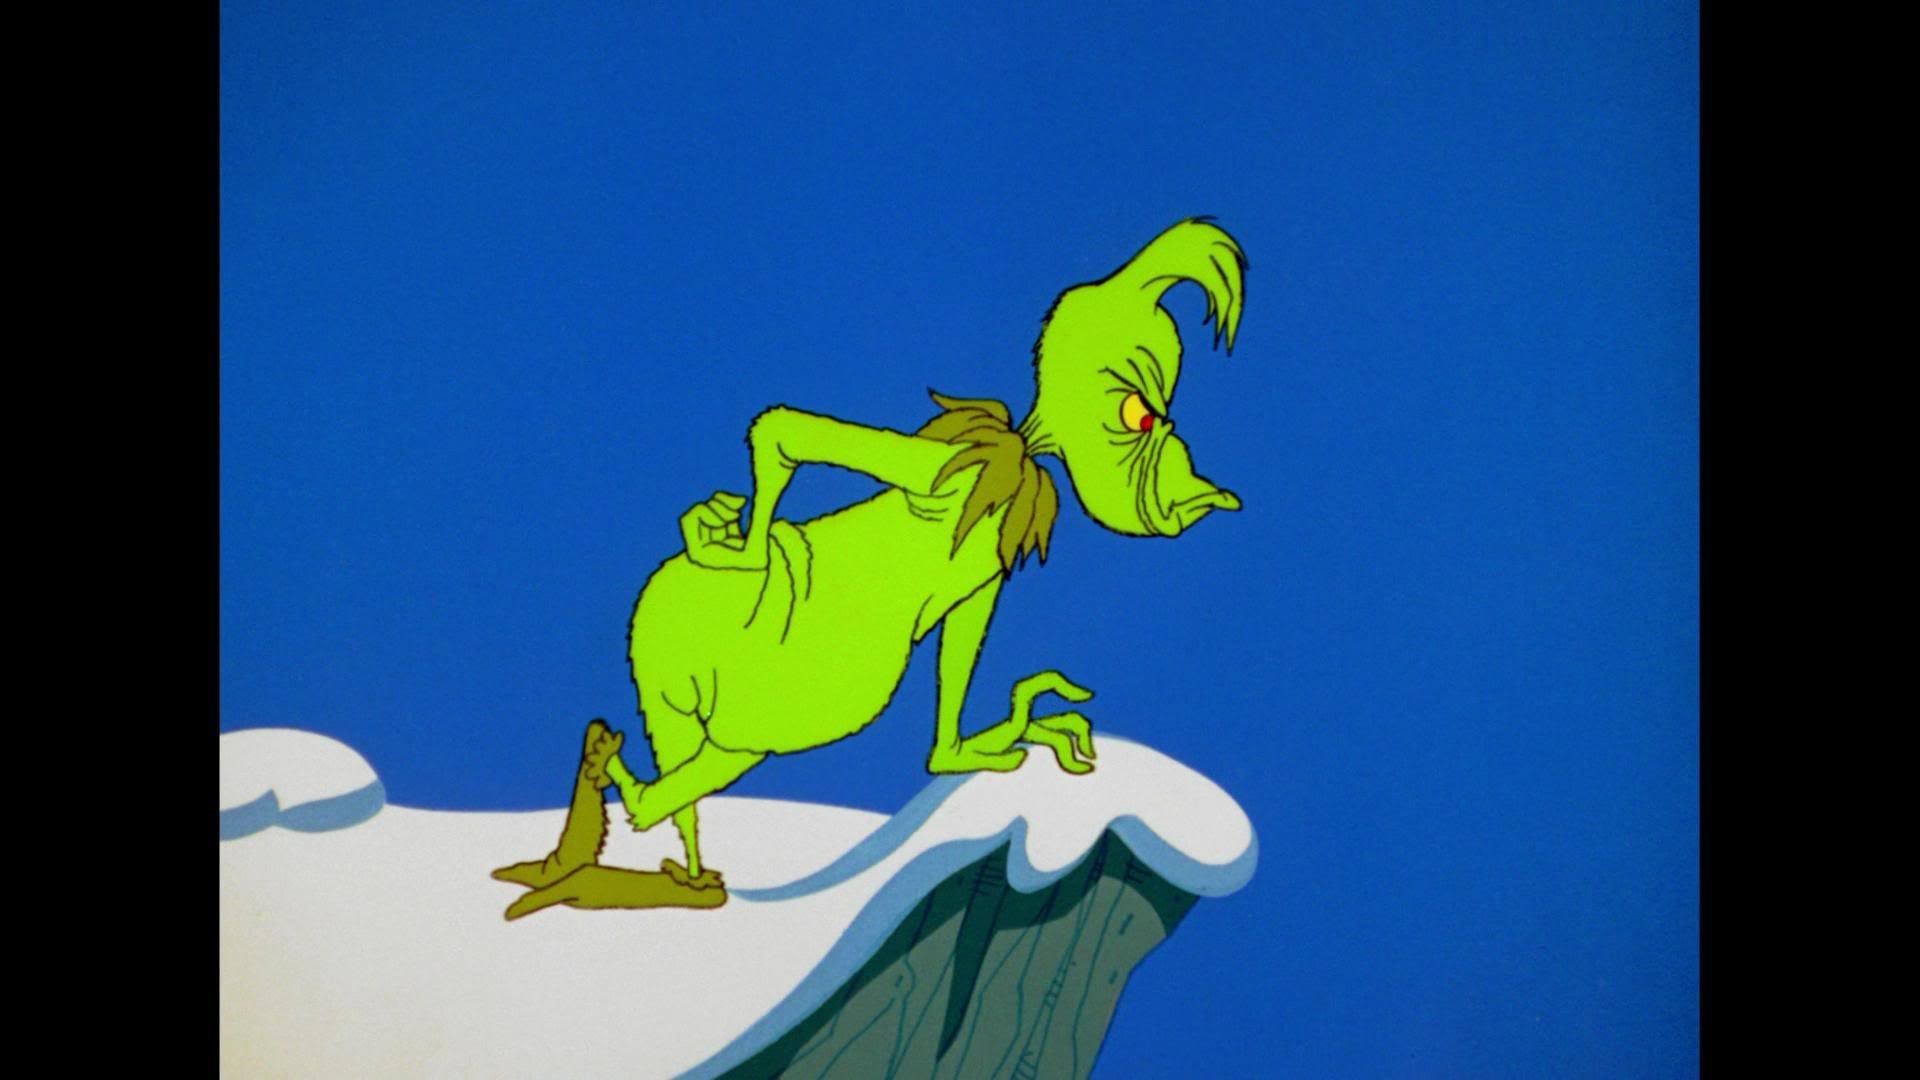 1920x1080 The Grinch Hating Christmas Wallpaper